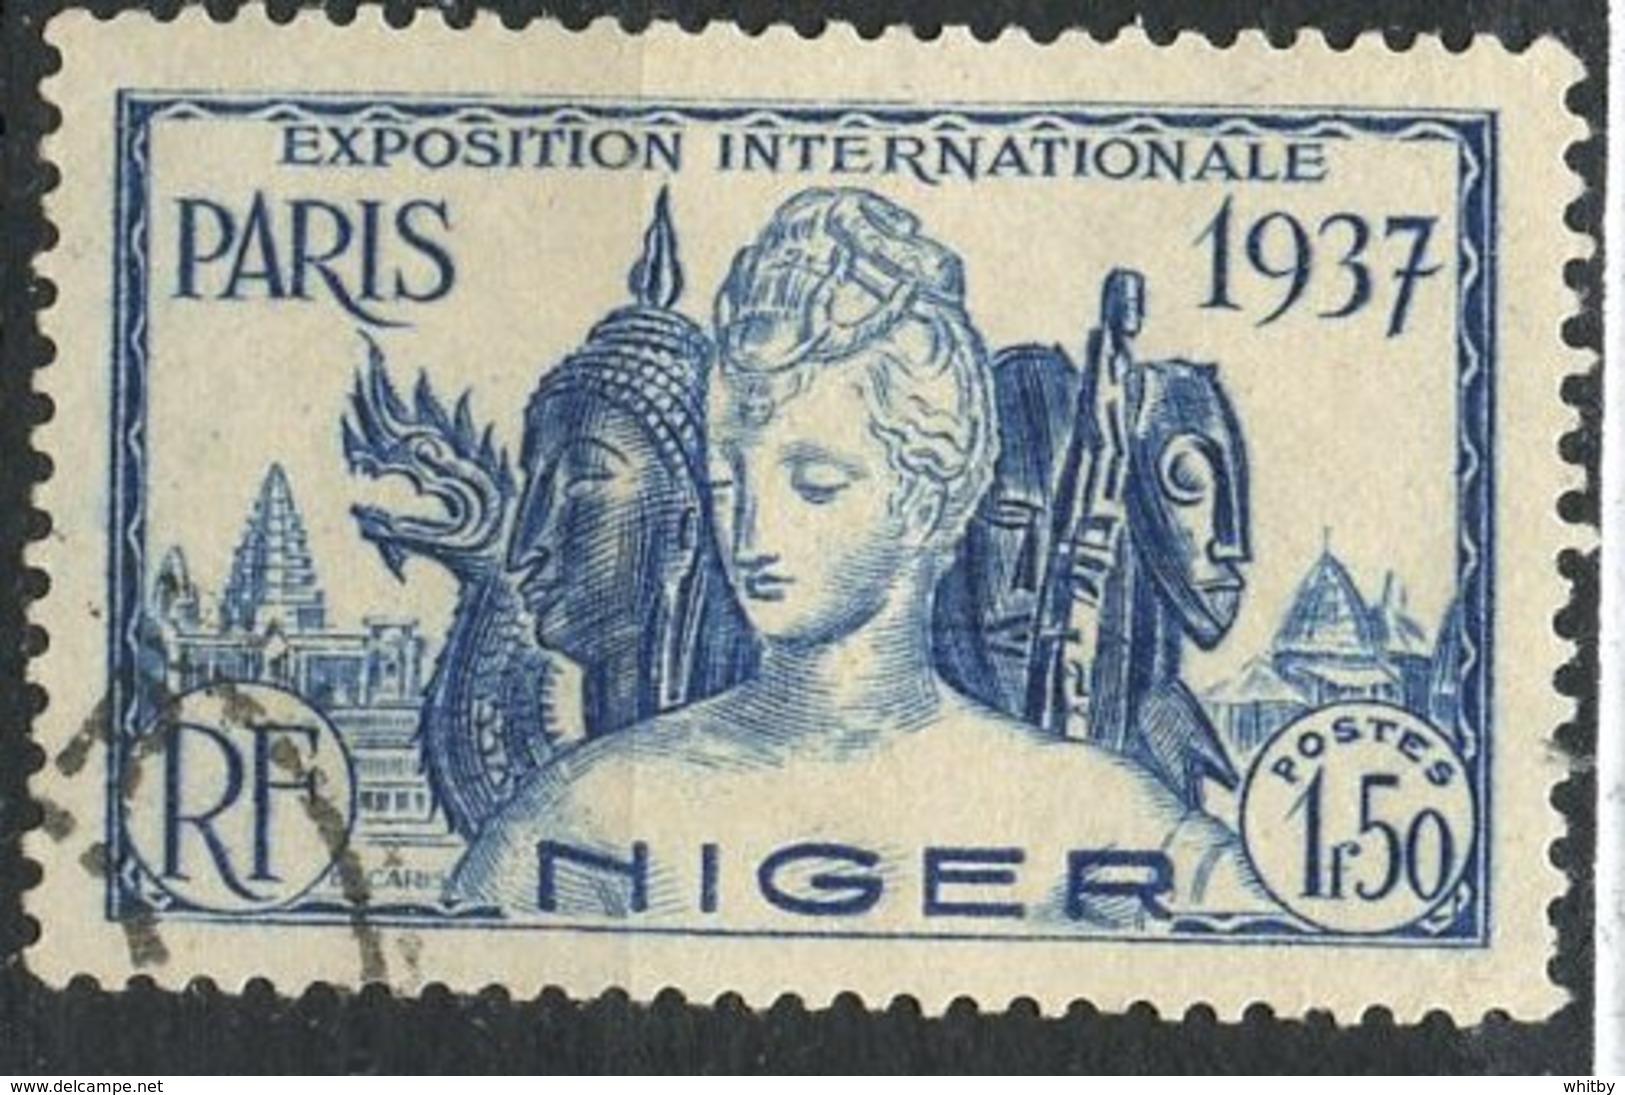 Niger 1937 1.50f Paris Exposition Issue #80 - Used Stamps